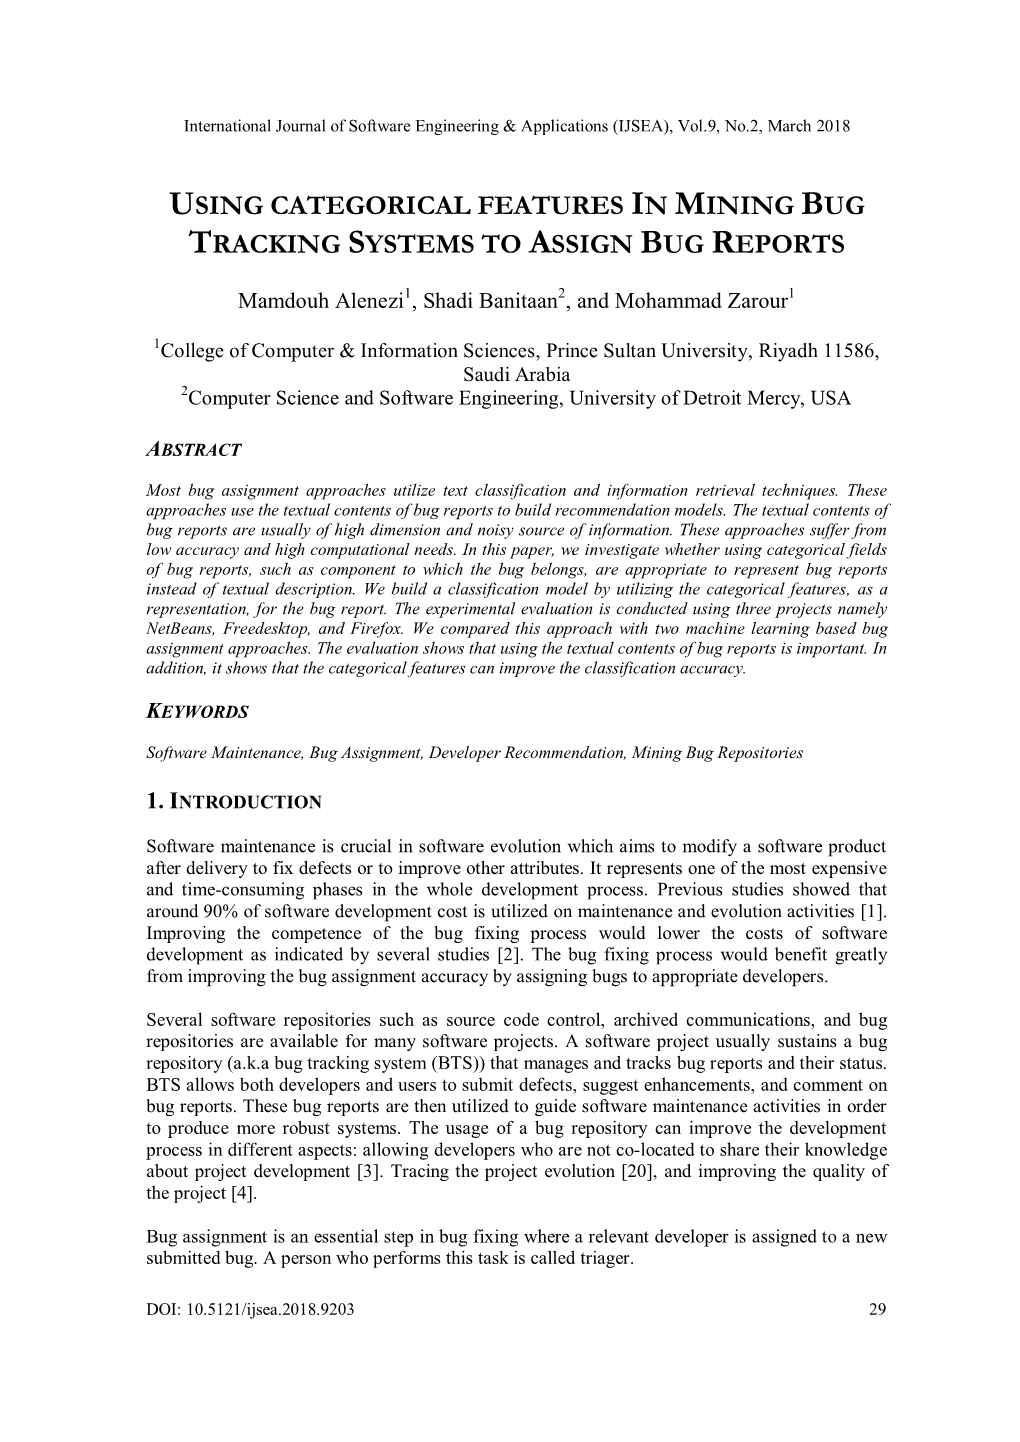 Using Categorical Features in Mining Bug Tracking Systems to Assign Bug Reports